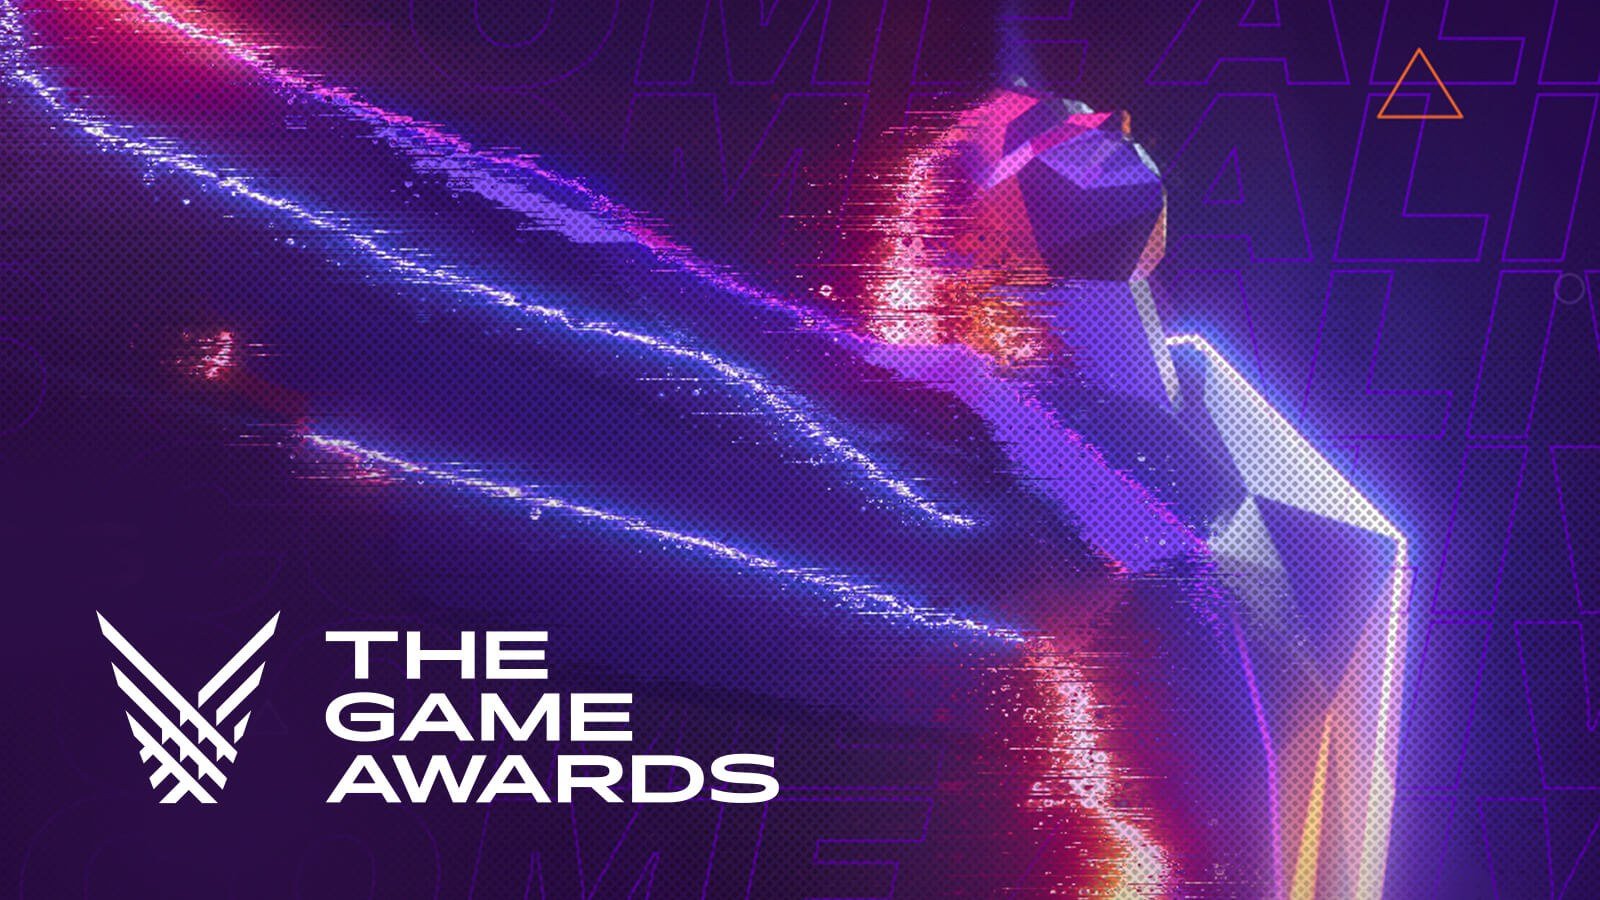 The Game Awards 2019: 200+ Full Sail Grads on the Year's Best Games